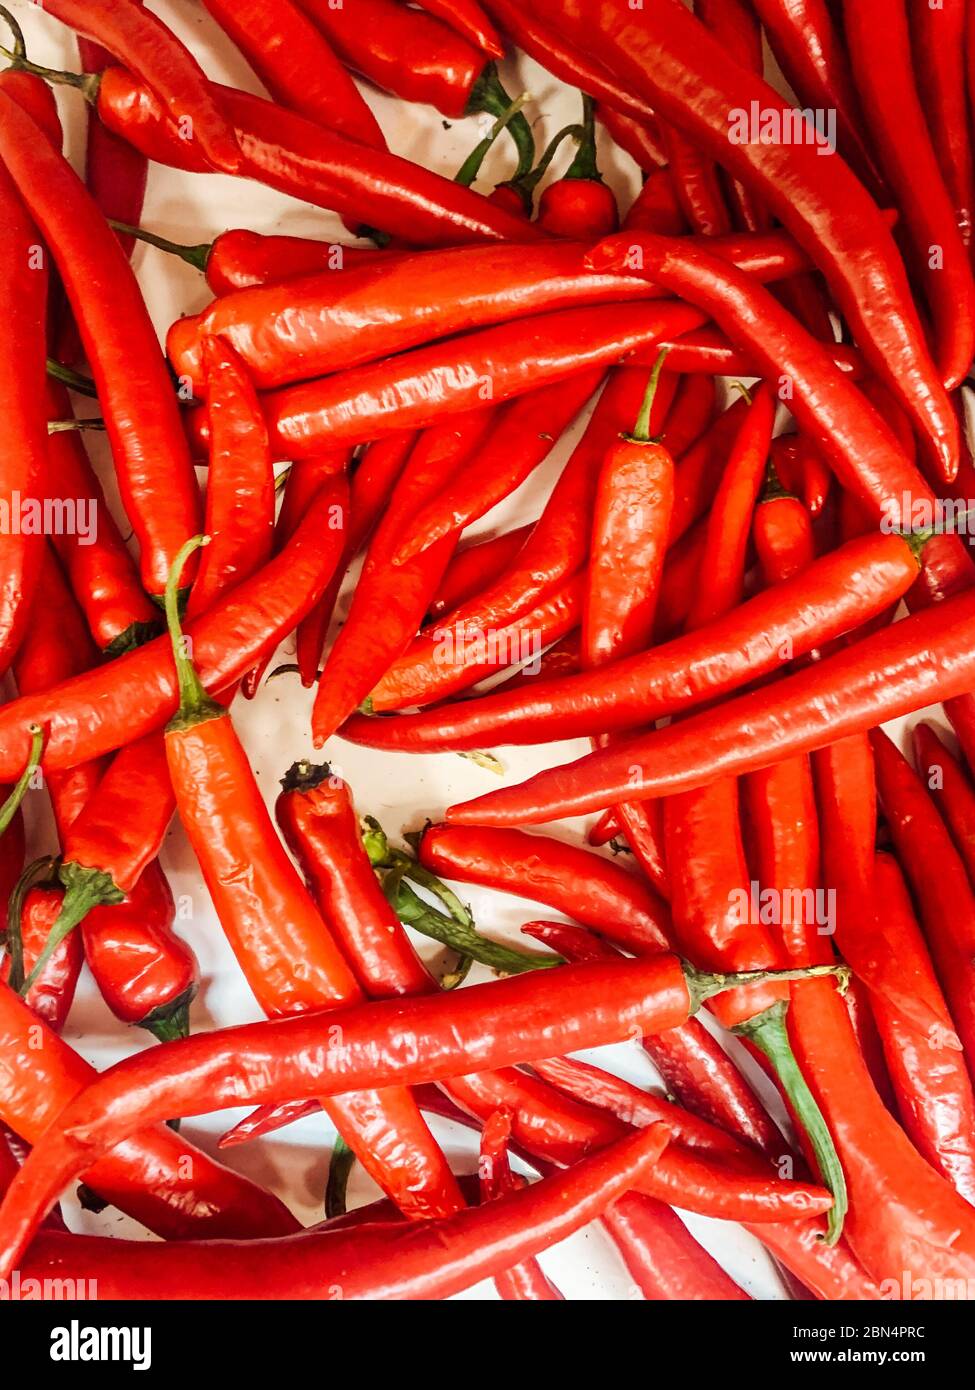 ripe spicy red chilli peppers for eating like a background Stock Photo